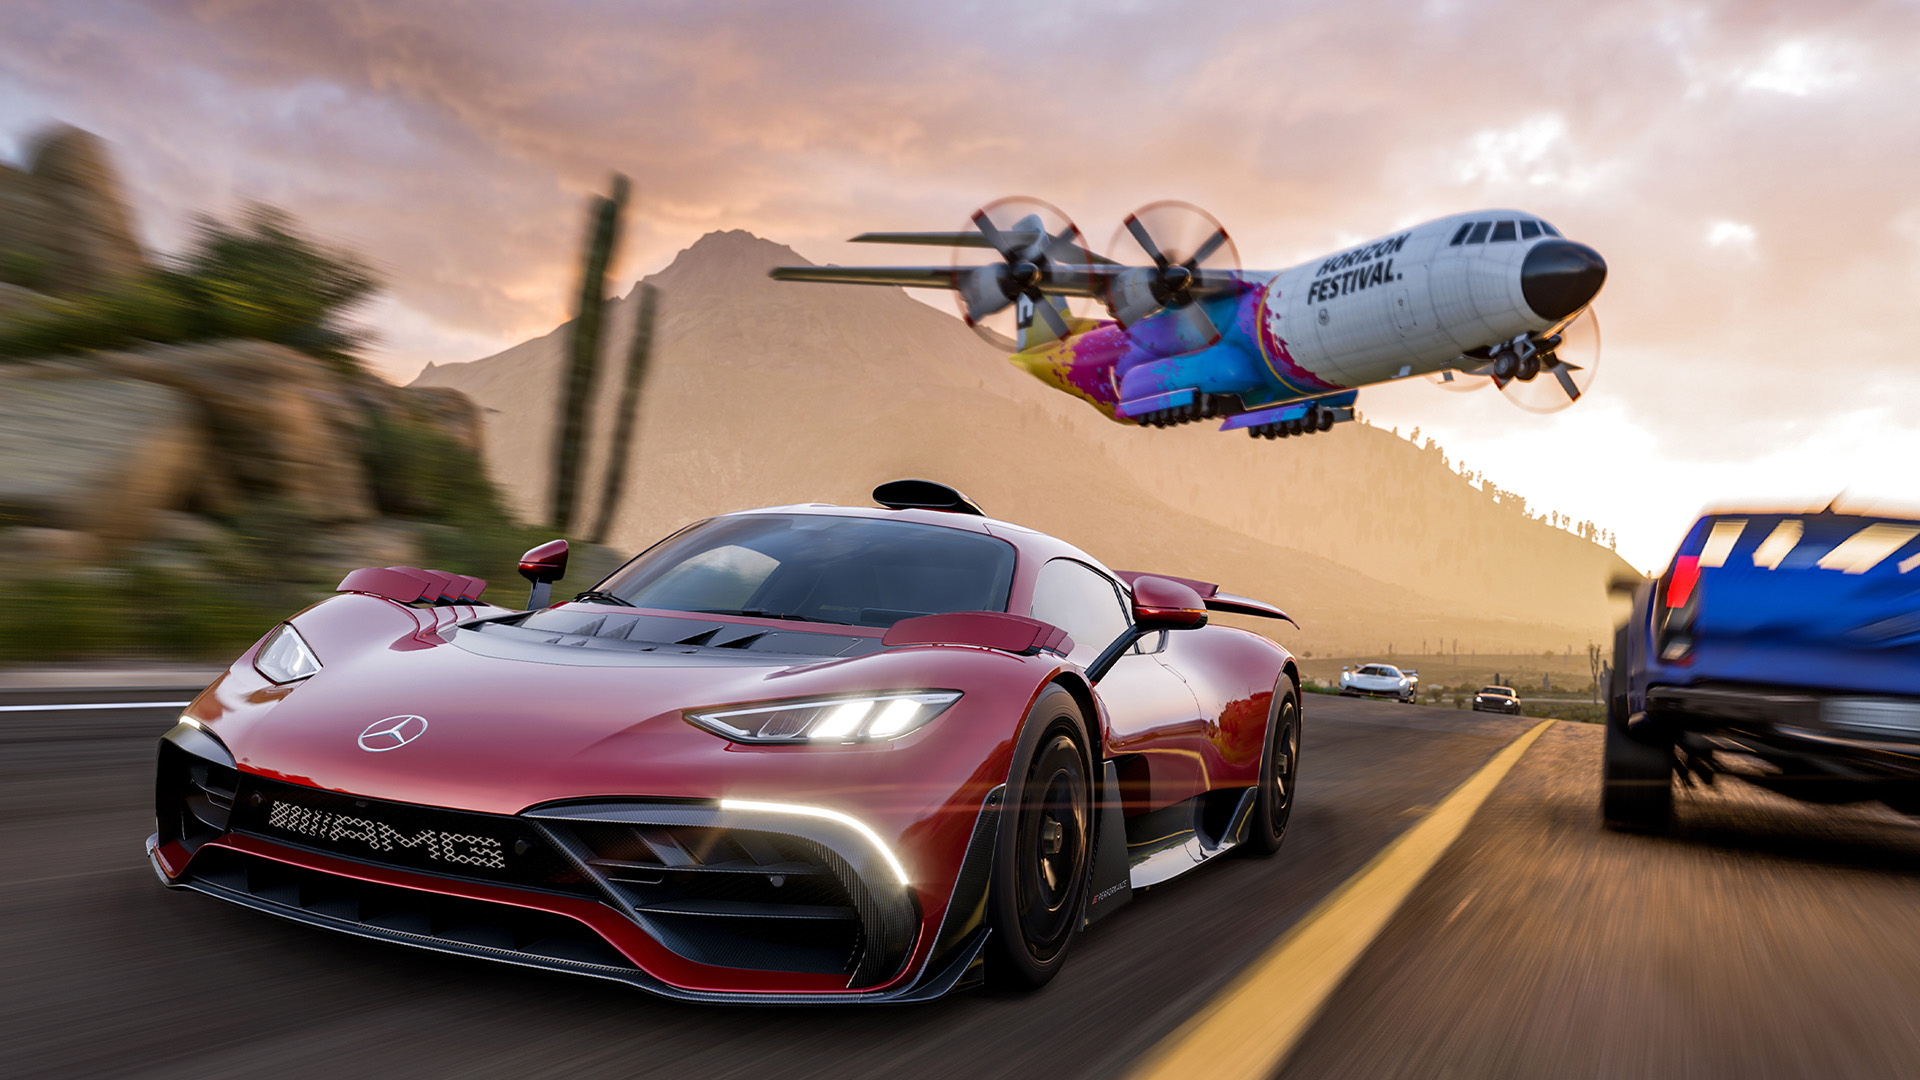 List of Cars - Forza Horizon 2 Guide - IGN